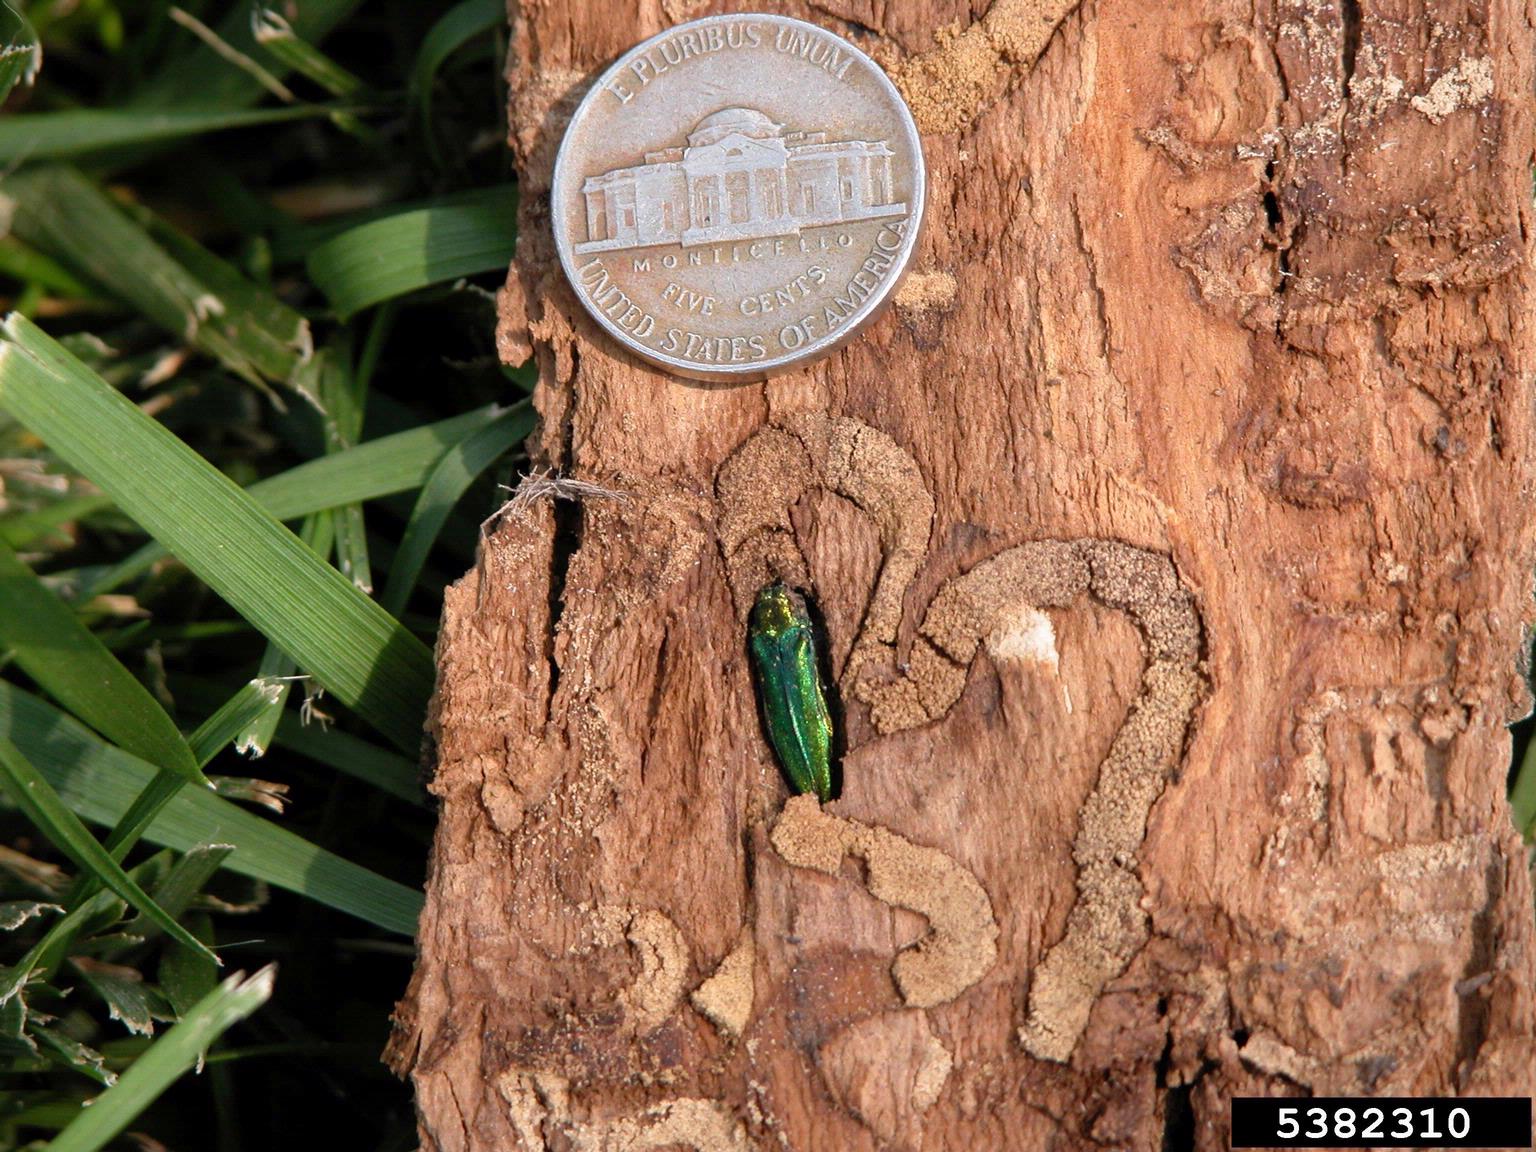 Photo of Emerald Ash Borer burrowed in tree bark with nickel located above the insect to show the scale.